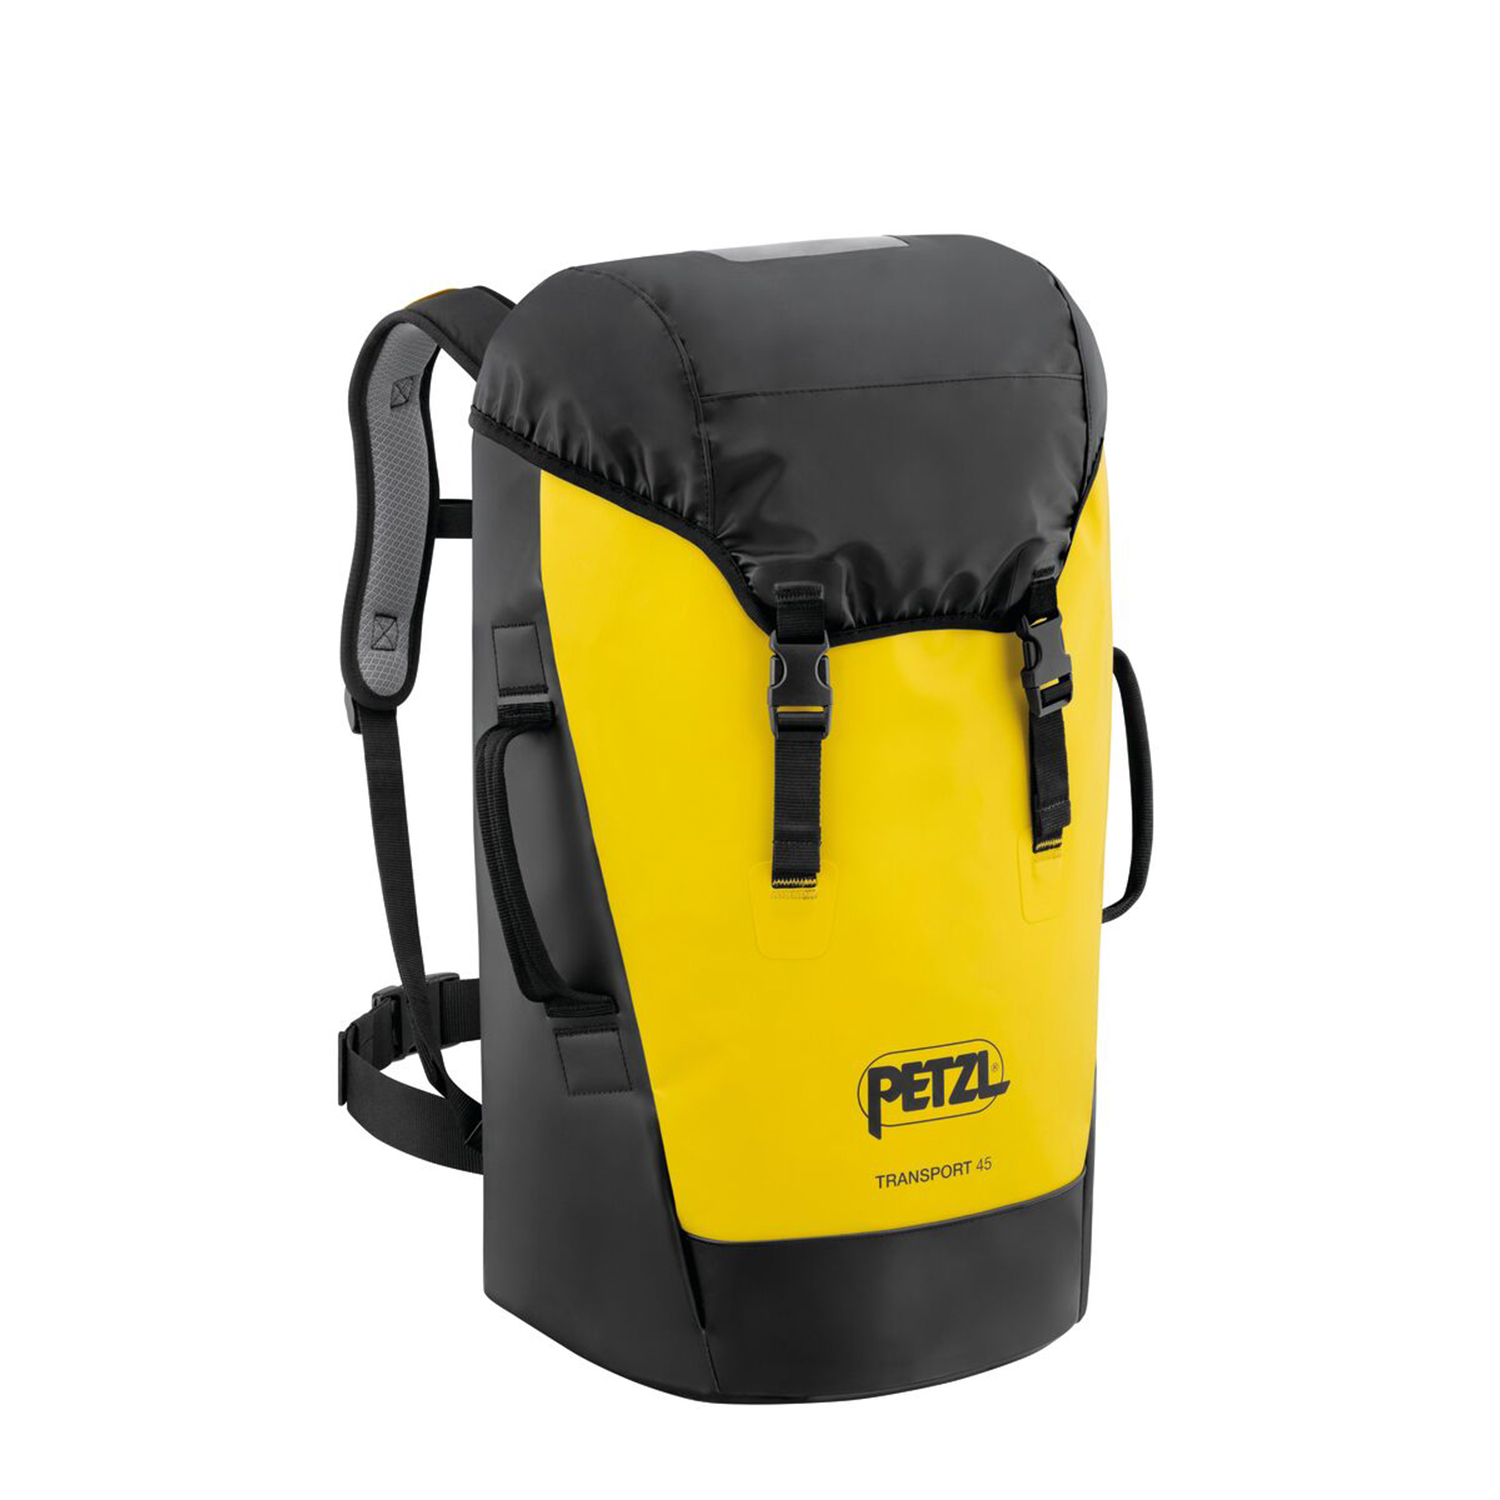 Petzl TRANSPORT Pack Bag - 45 Liter from Columbia Safety